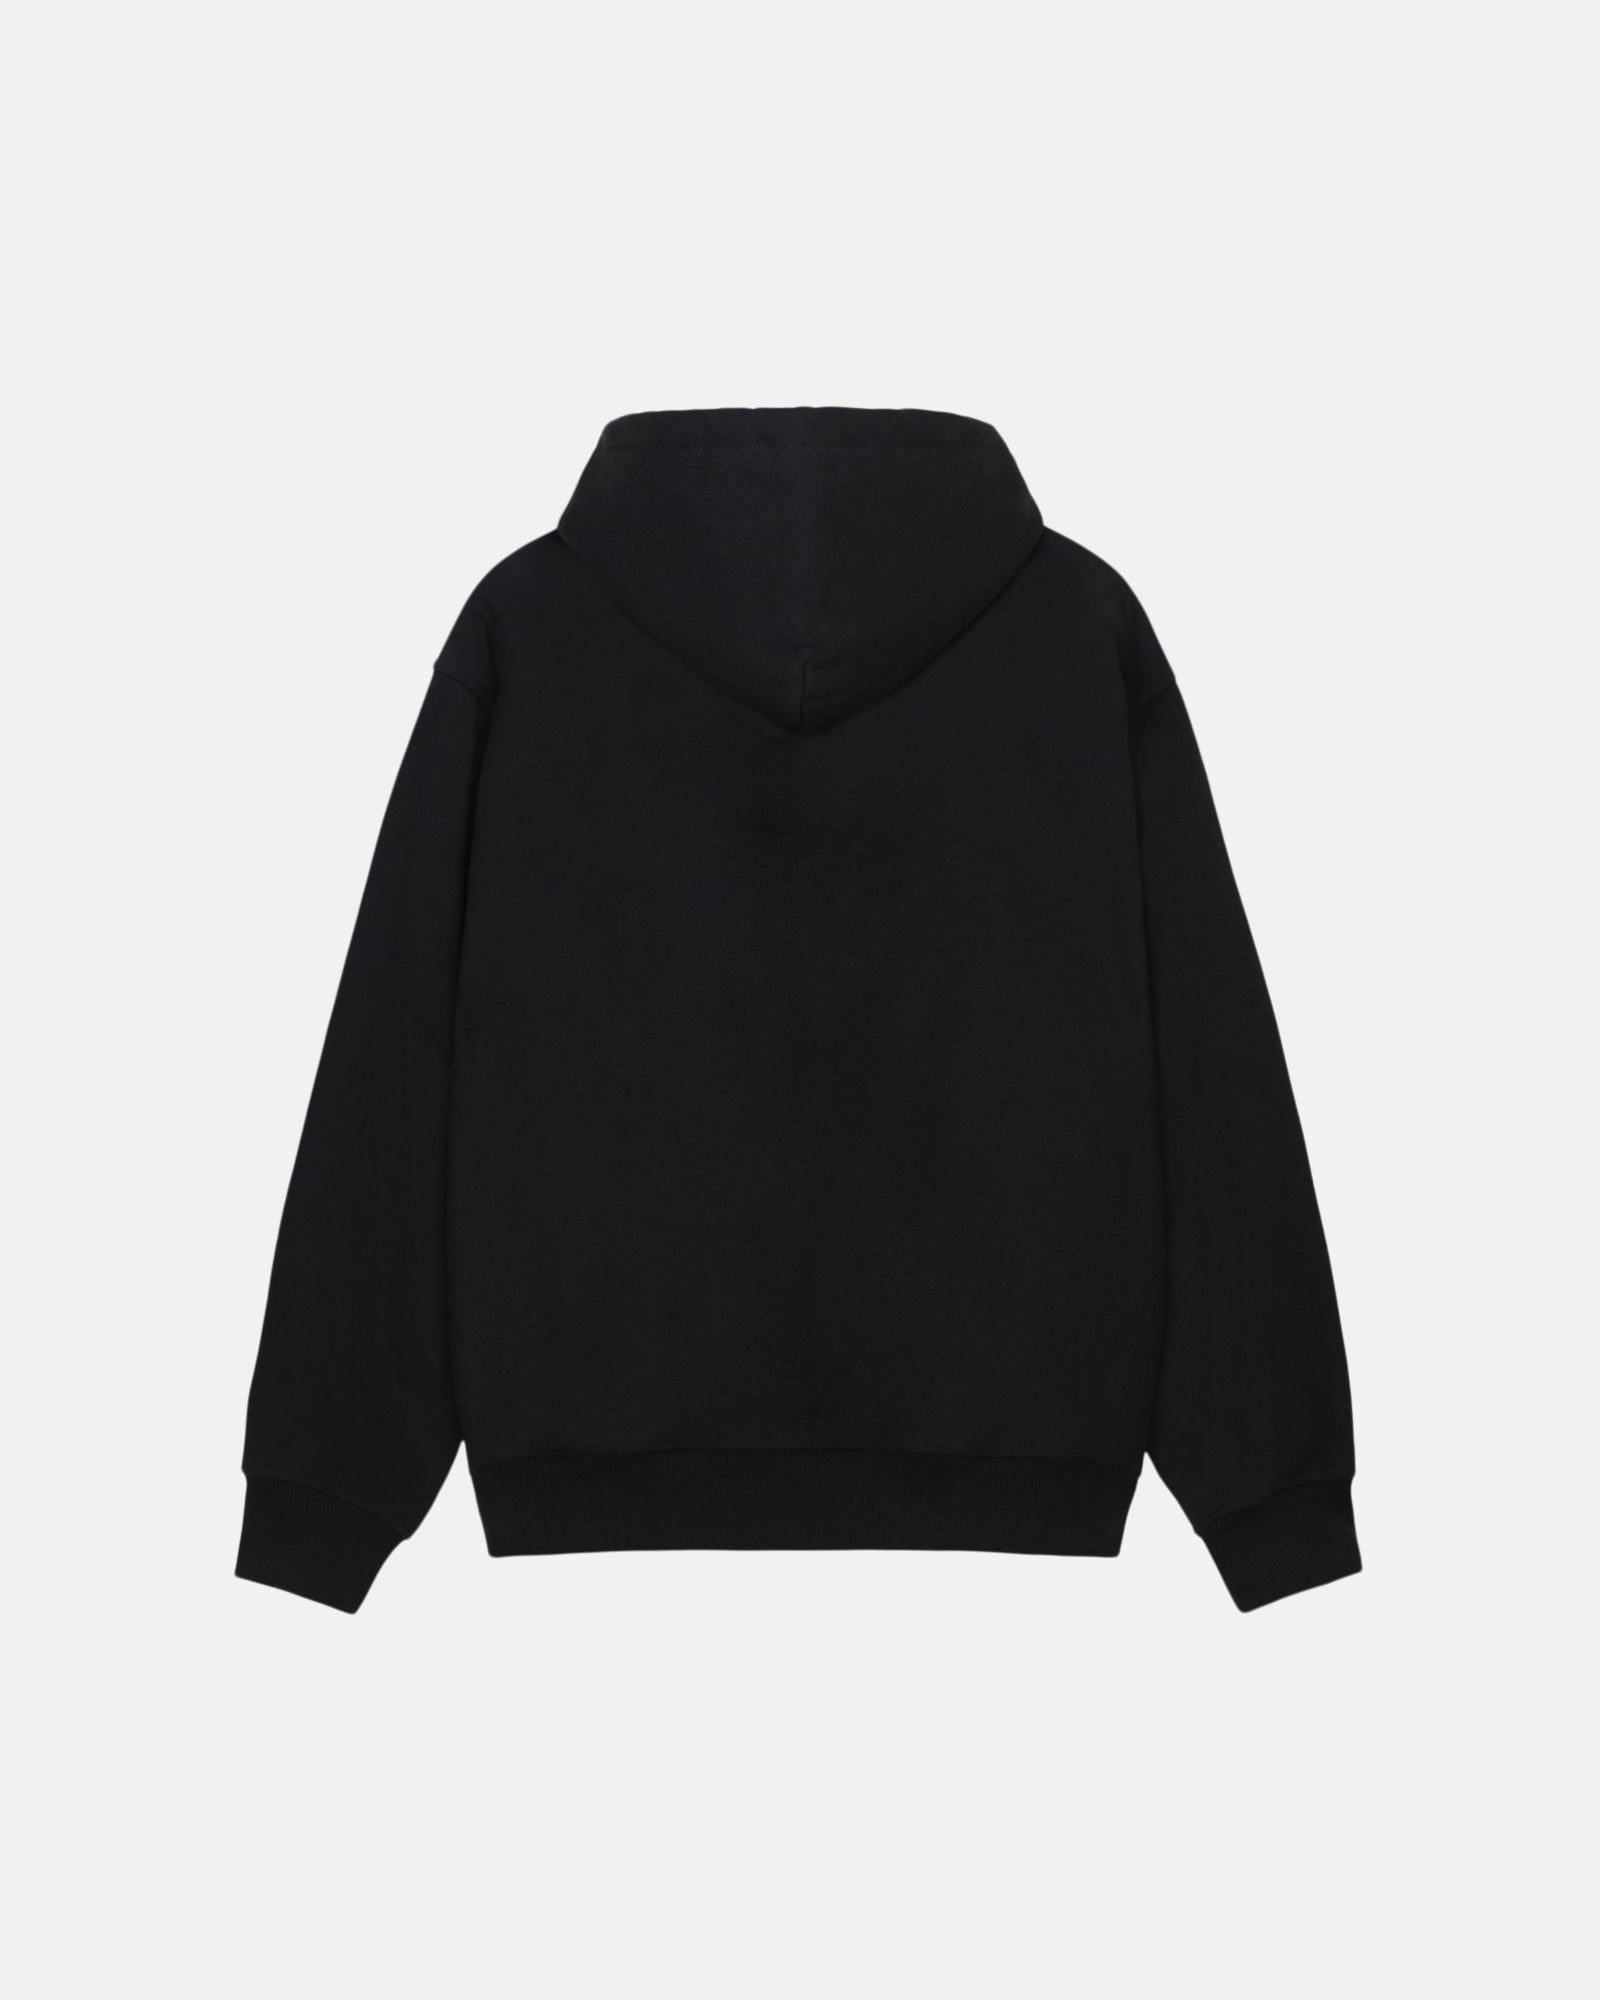 Men's Hoodies, Crewneck Sweatshirts and Sweaters by Stussy – Page 